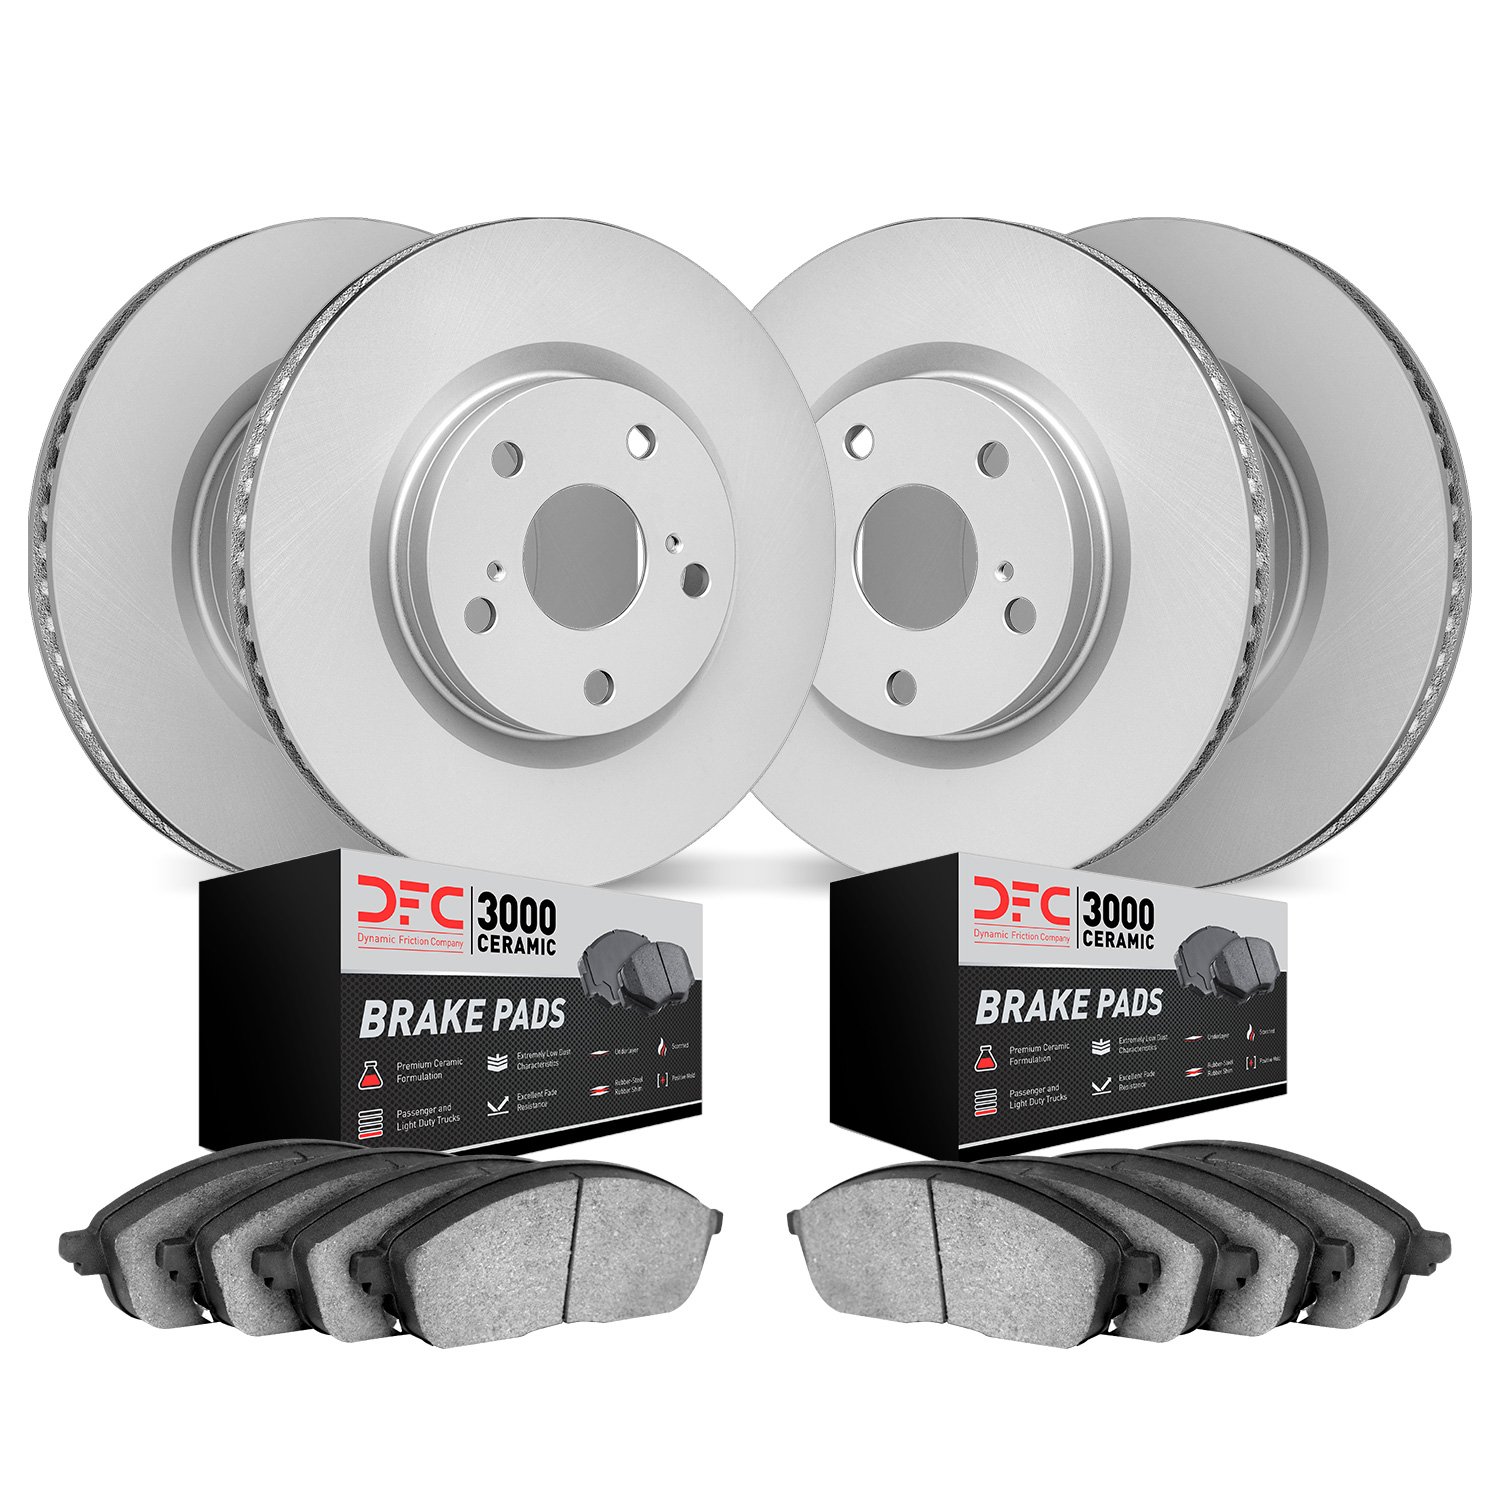 4304-31016 Geospec Brake Rotors with 3000-Series Ceramic Brake Pads Kit, 2001-2005 BMW, Position: Front and Rear